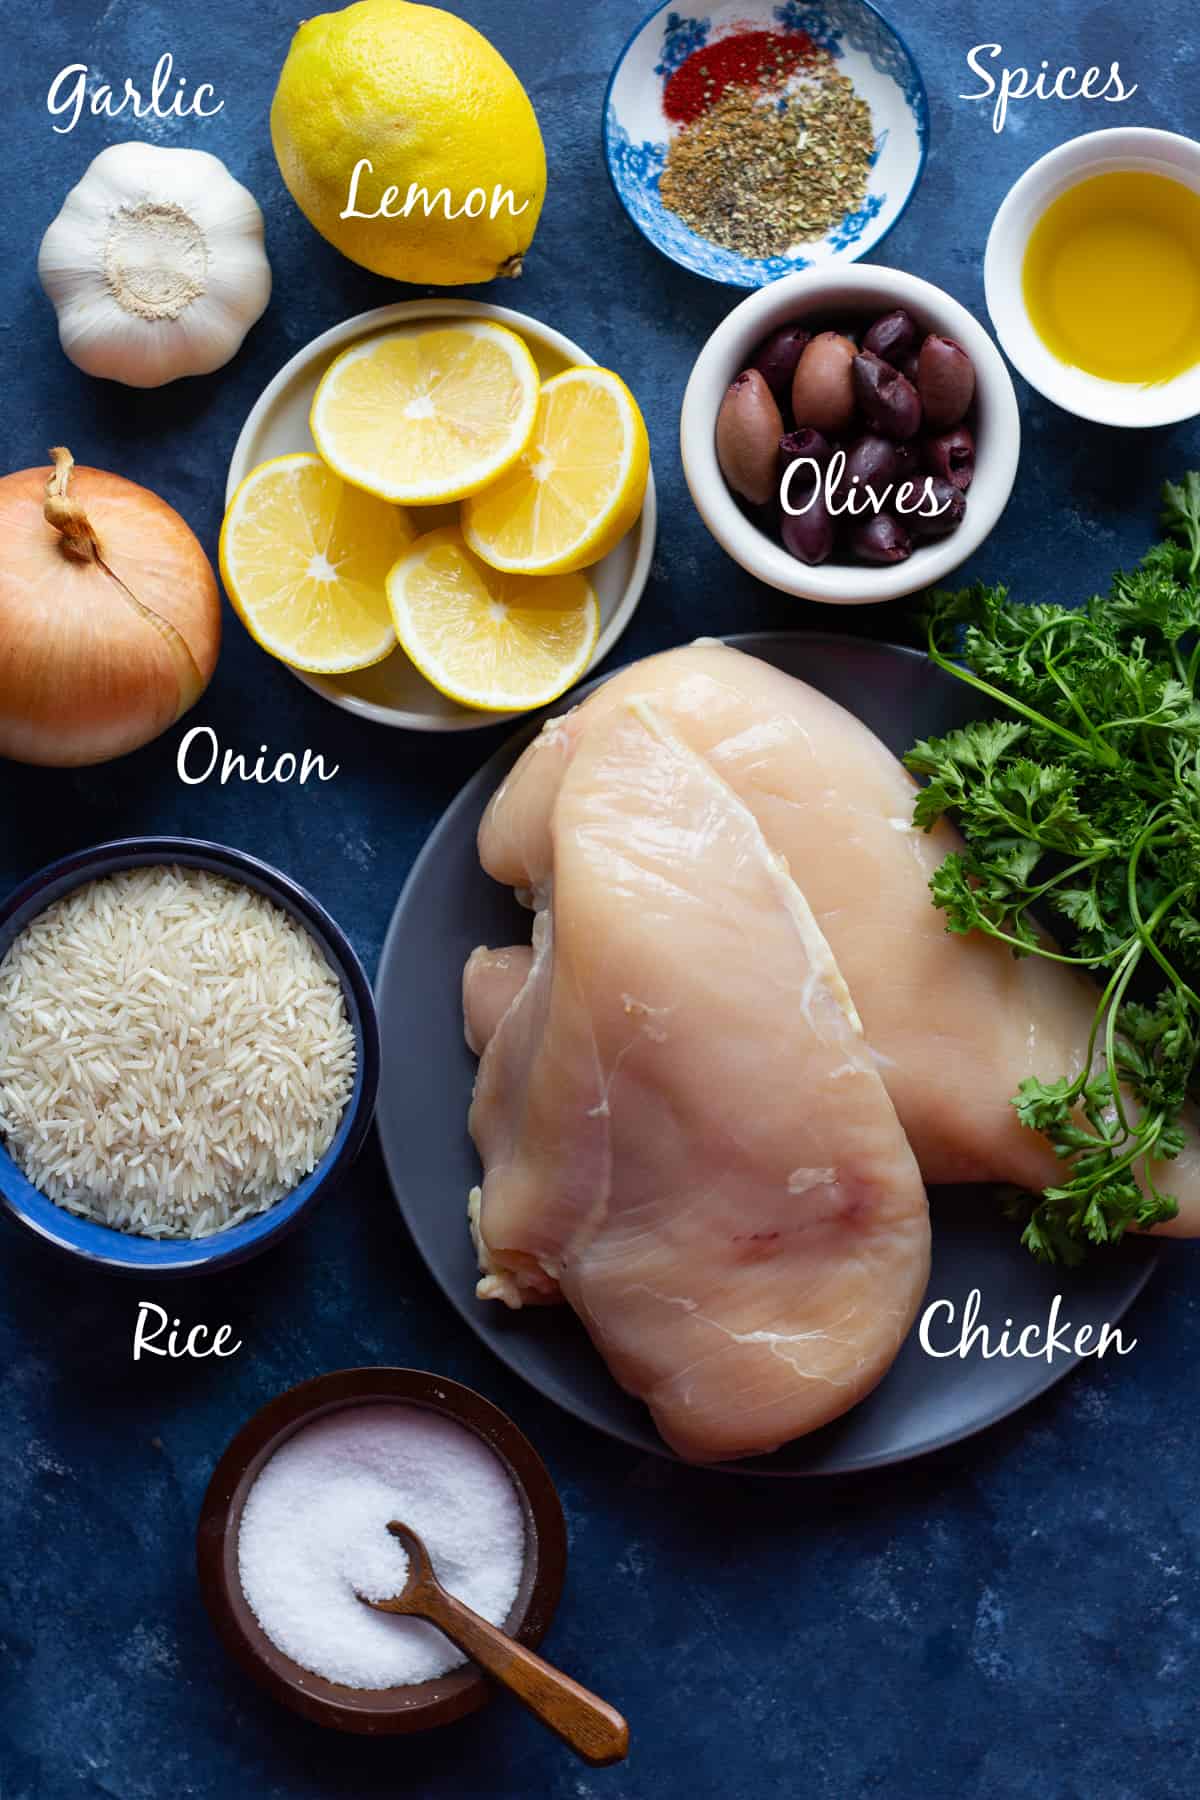 Ingredients to make this recipe are chicken, rice, onion, garlic, olives, olive oil, spices and lemon